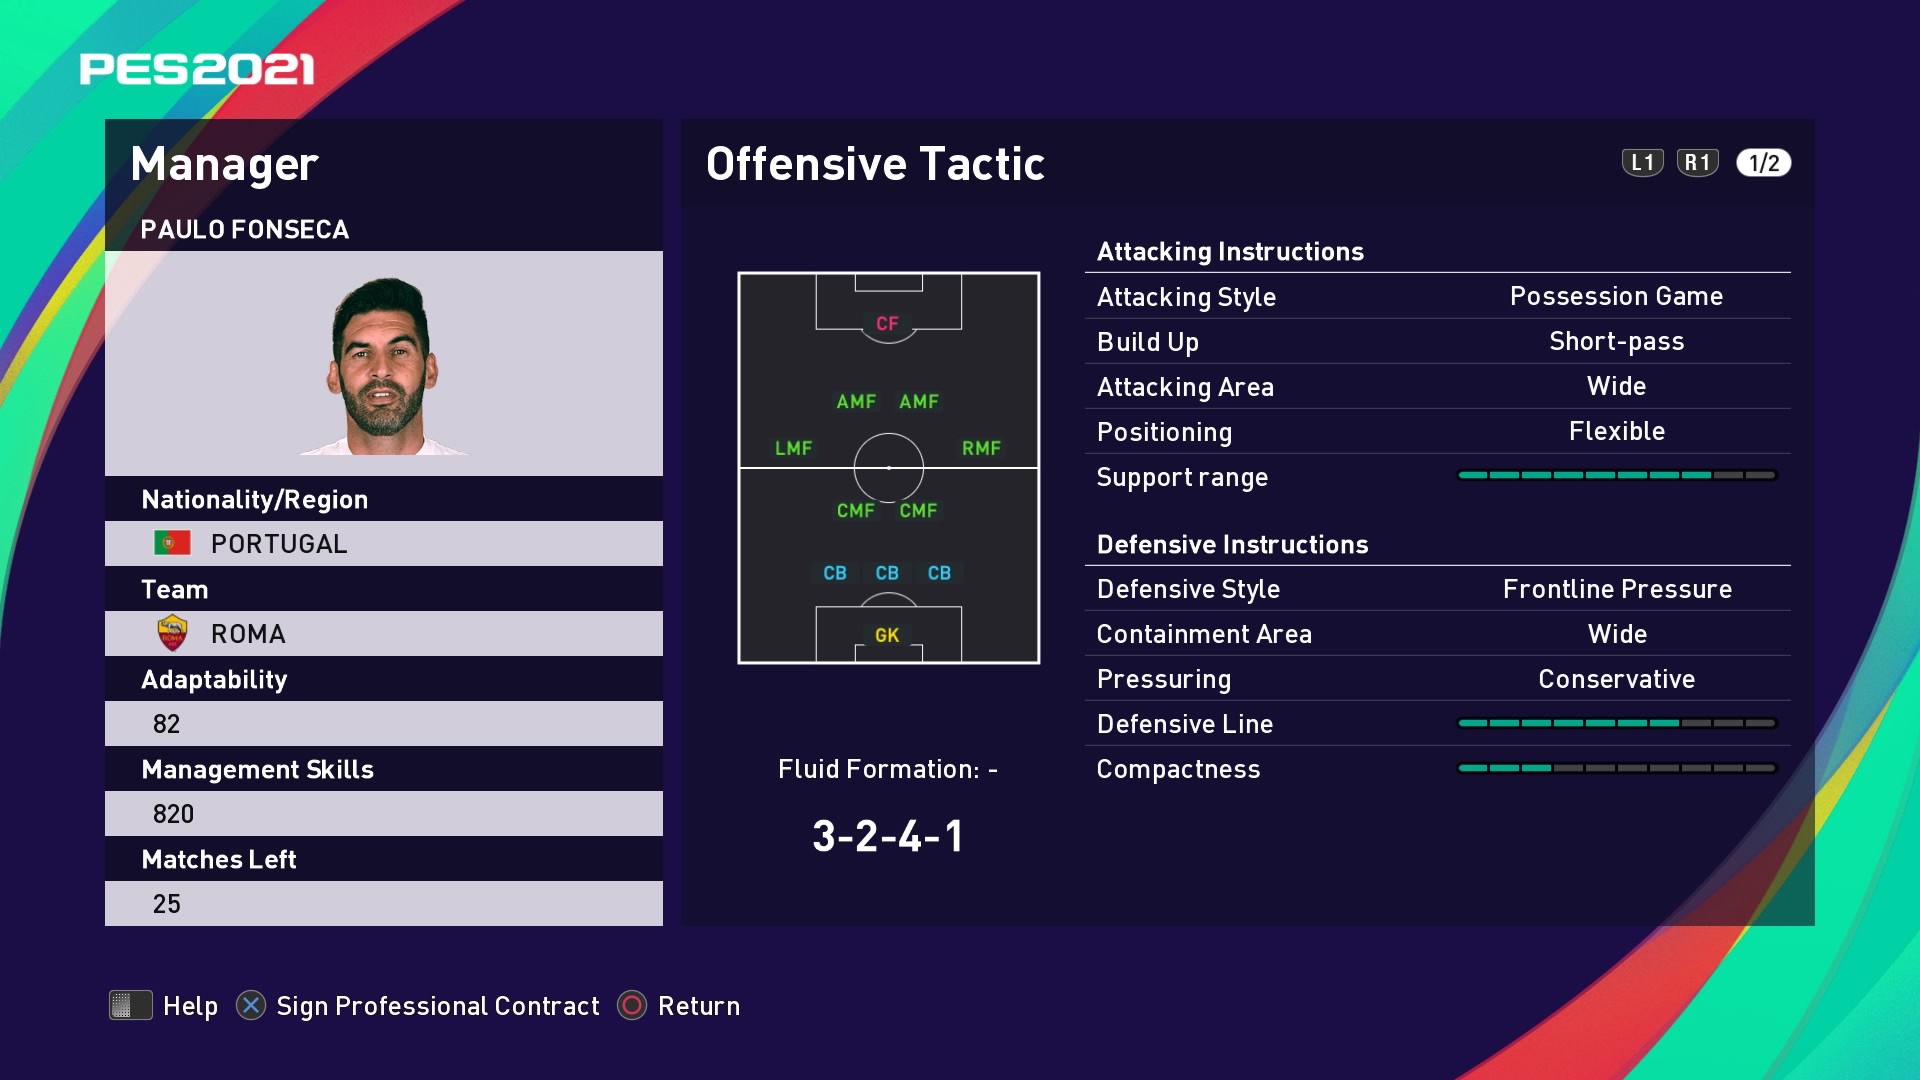 Paulo Fonseca (2) Offensive Tactic in PES 2021 myClub